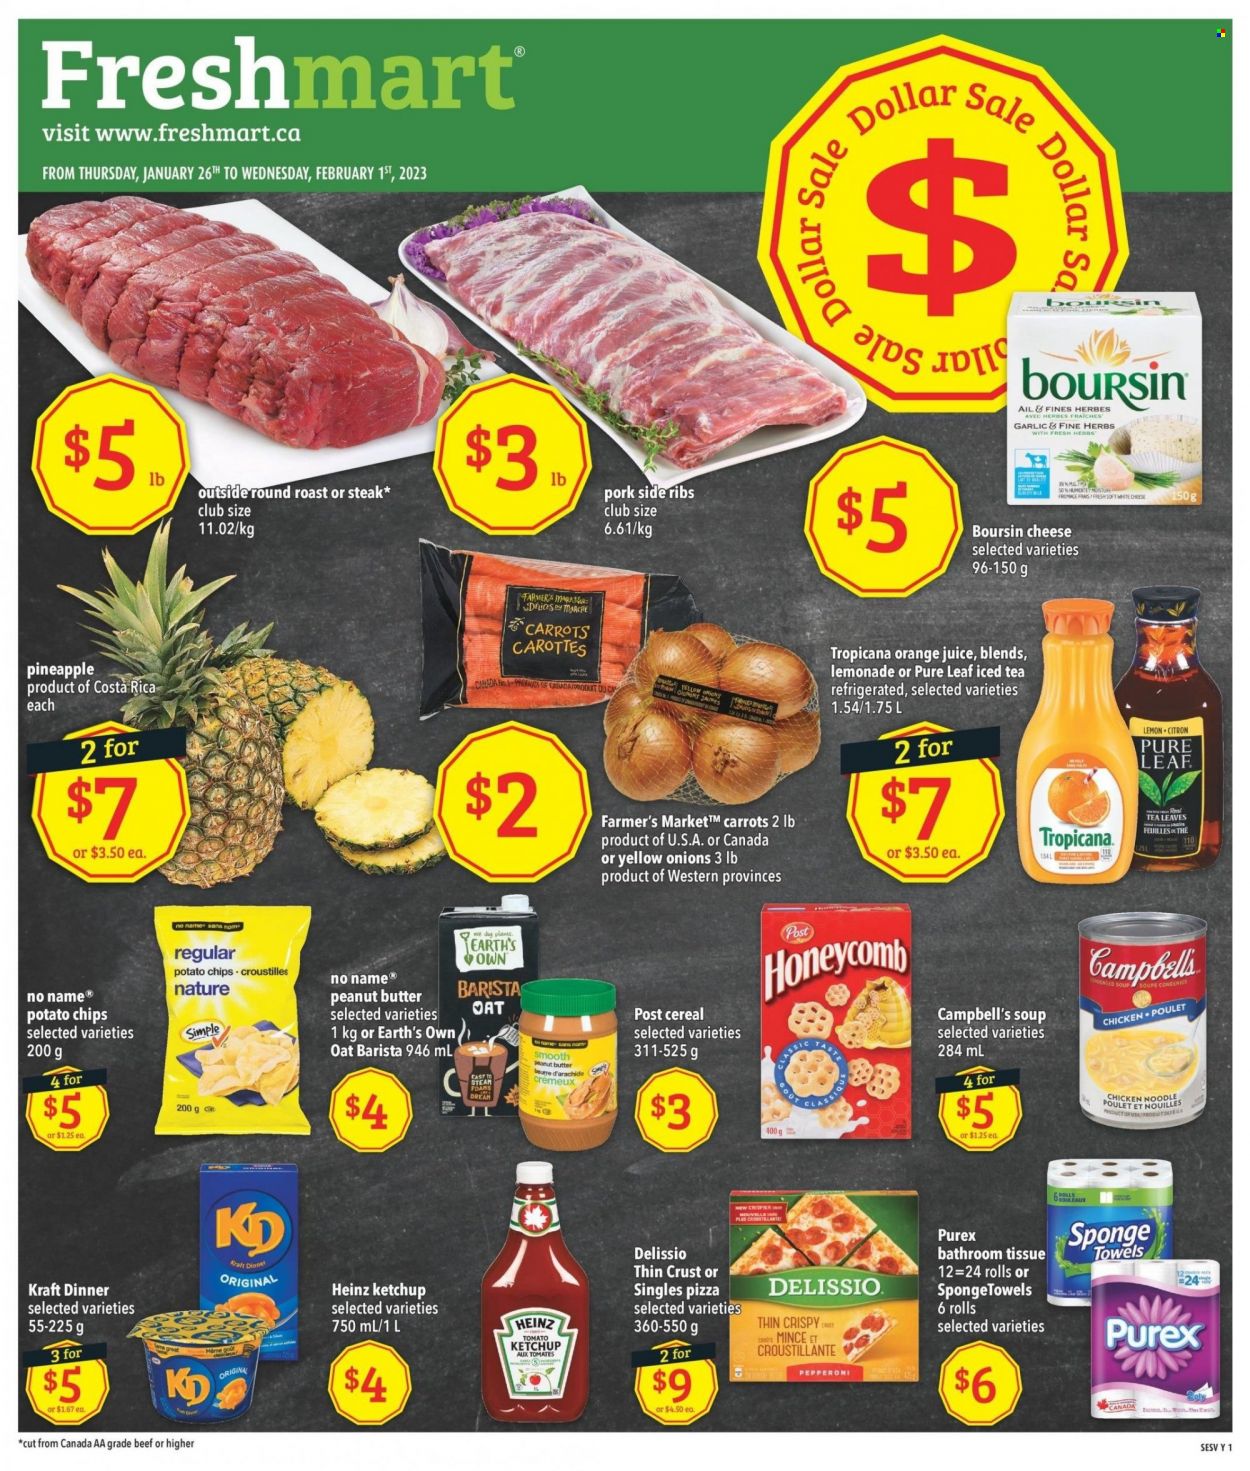 thumbnail - Freshmart Flyer - January 26, 2023 - February 01, 2023 - Sales products - carrots, pineapple, No Name, Campbell's, pizza, condensed soup, soup, noodles, instant soup, Kraft®, pepperoni, potato chips, chips, oats, cereals, lemonade, orange juice, juice, ice tea, Pure Leaf, beef meat, round roast, ribs, bath tissue, Purex, Heinz, ketchup, steak. Page 1.